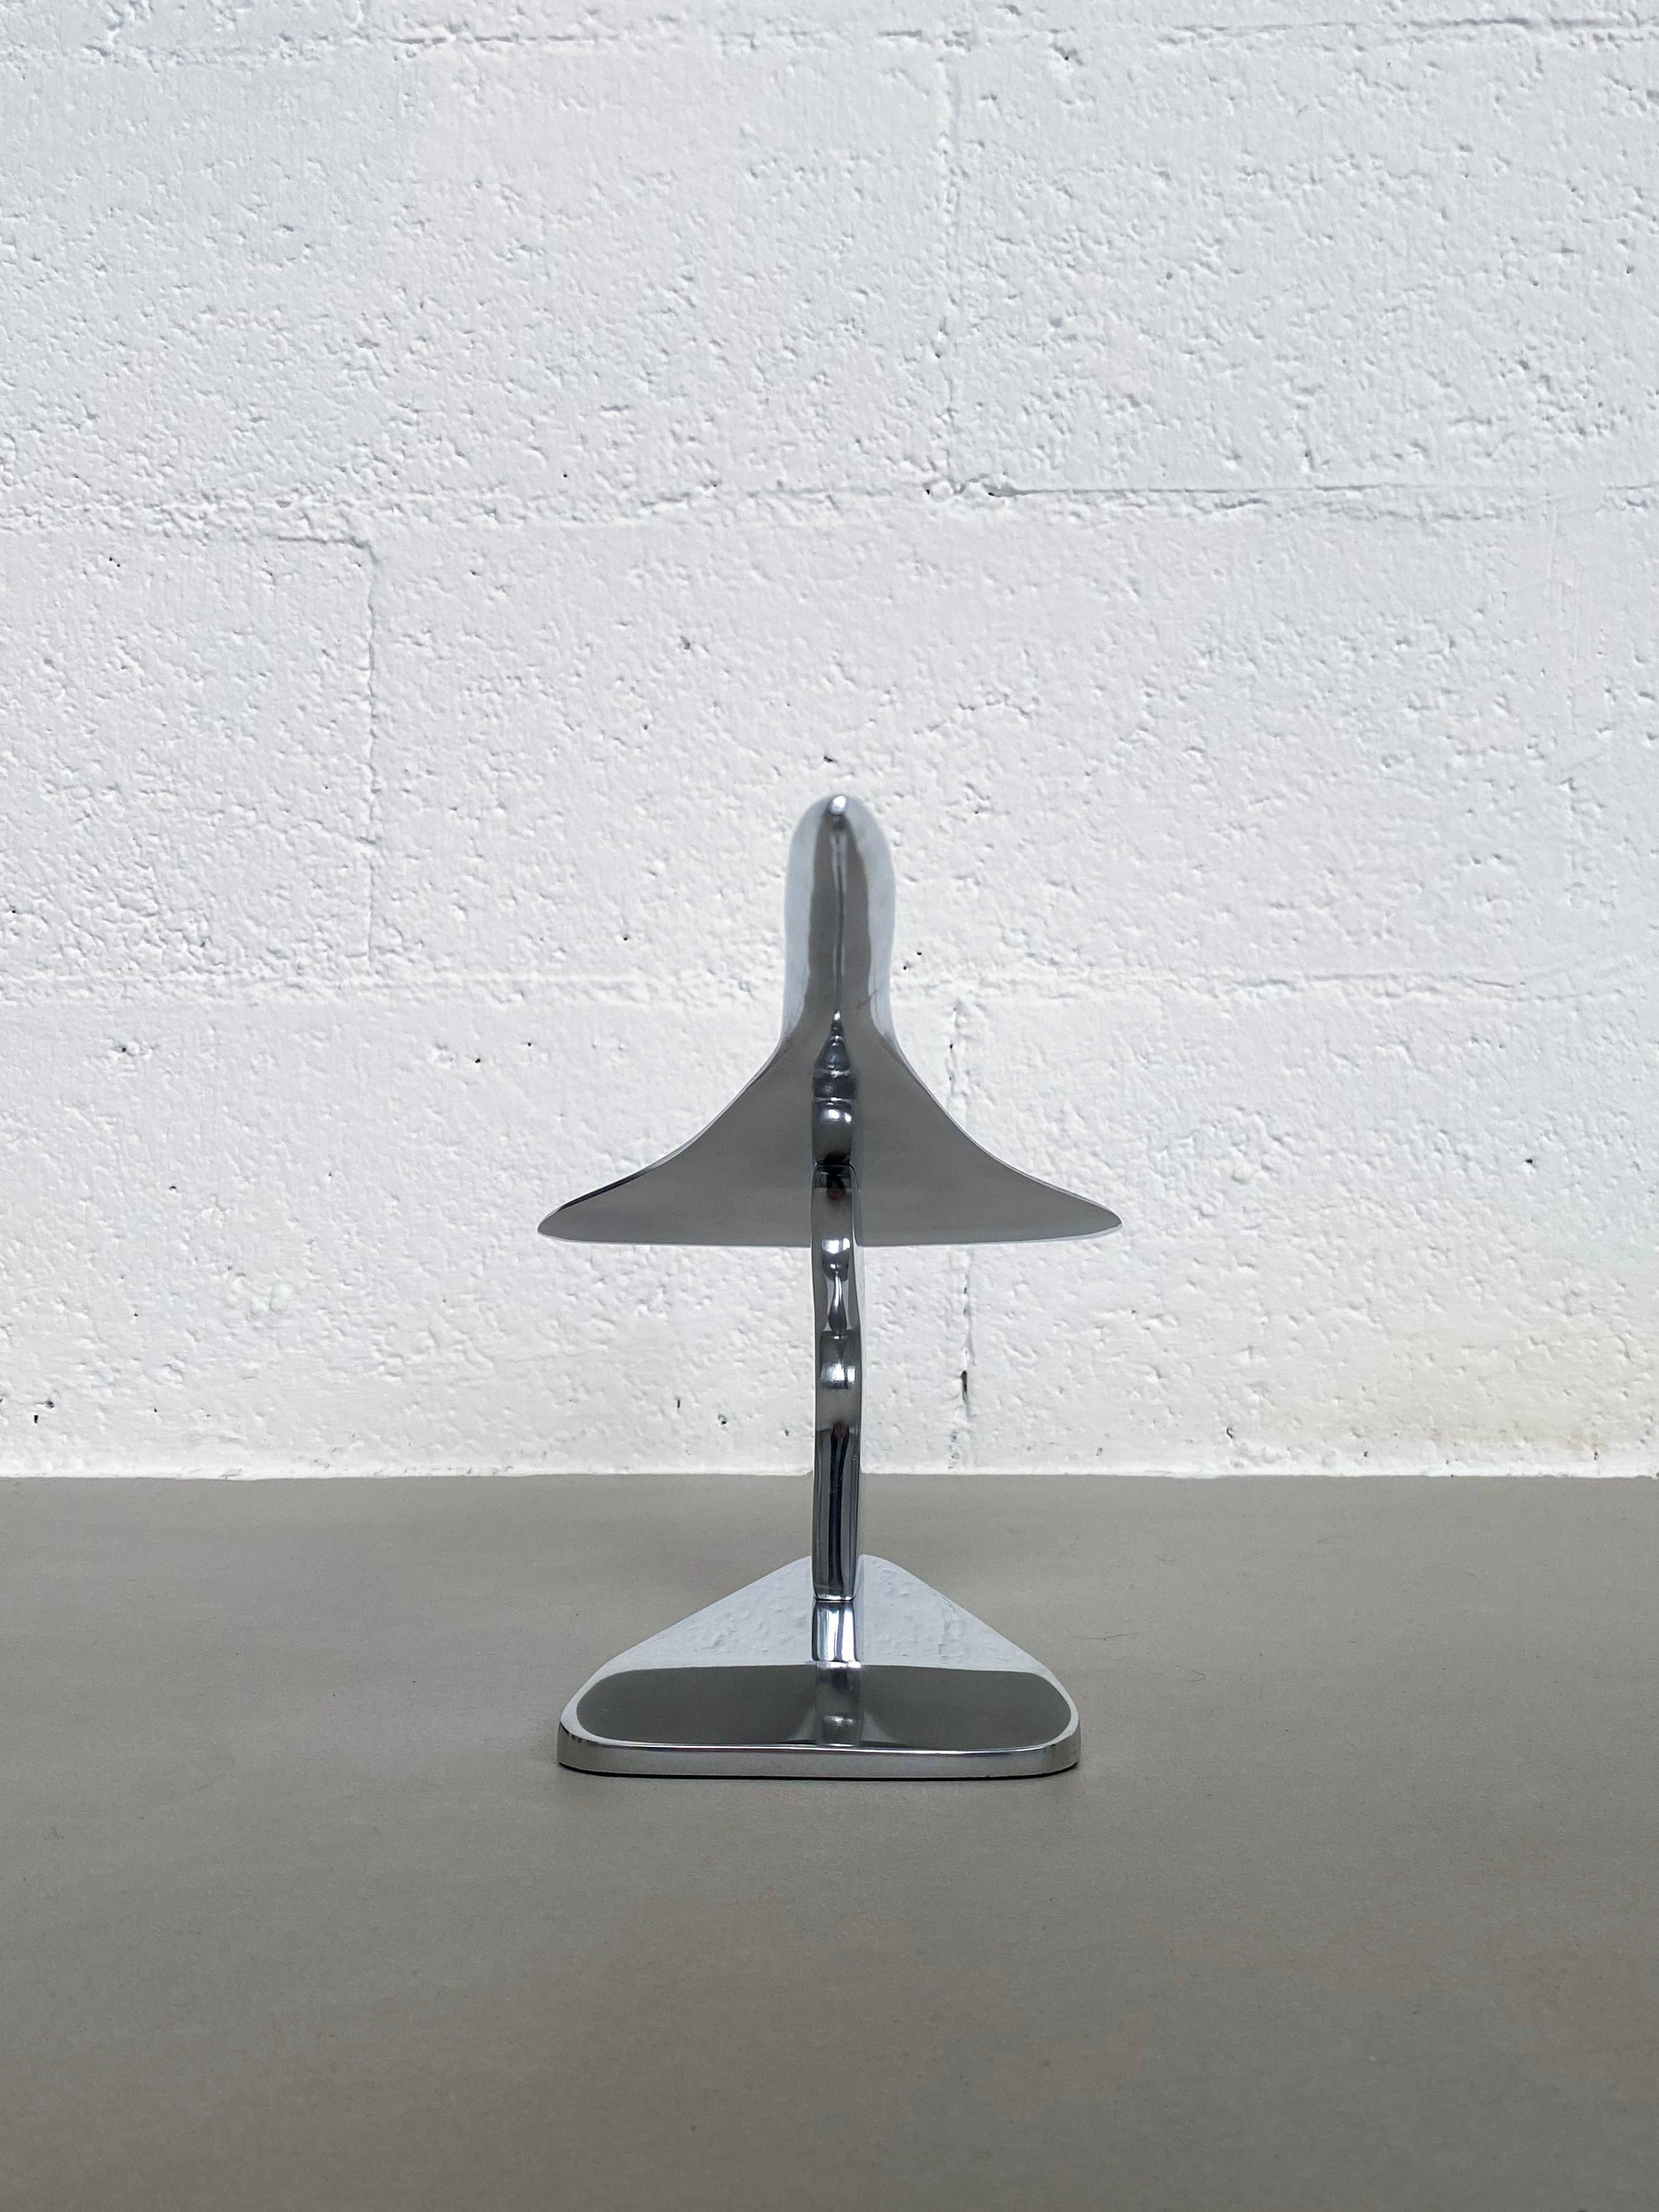 Space Age Concorde Supersonic Plane Display Mounted Sculpture in Polished Stainless Steel For Sale